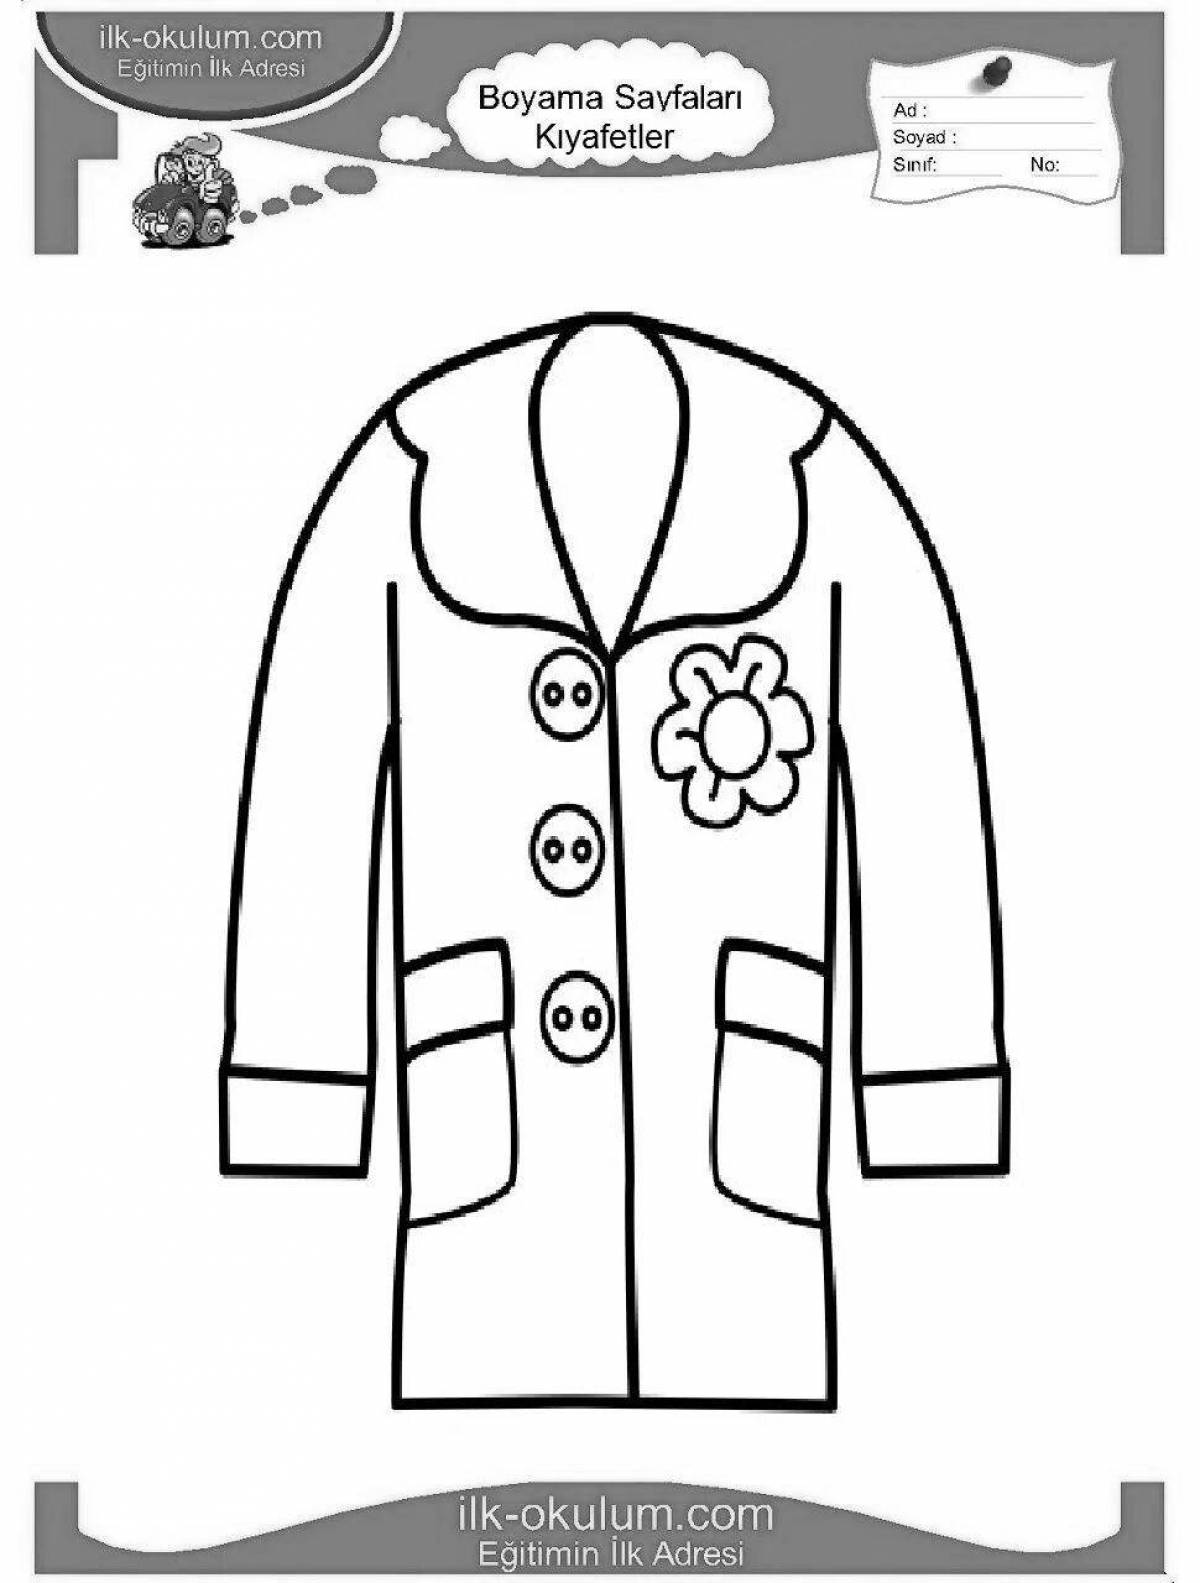 Cool coat coloring page for kids